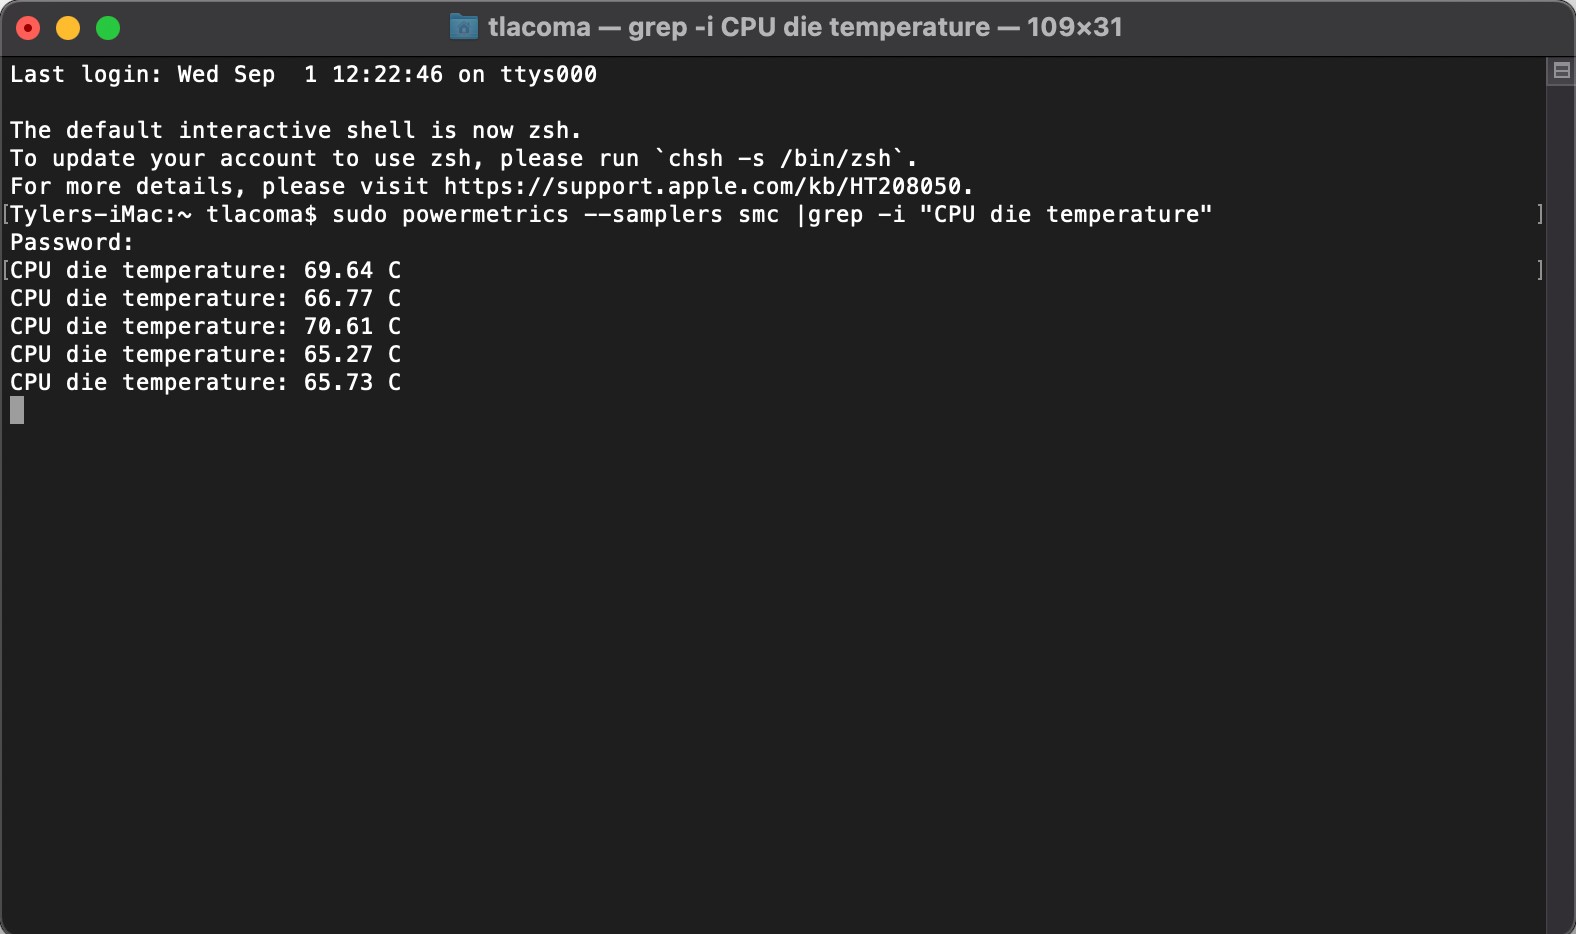 The terminal tracking CPU temperature after a successful command.